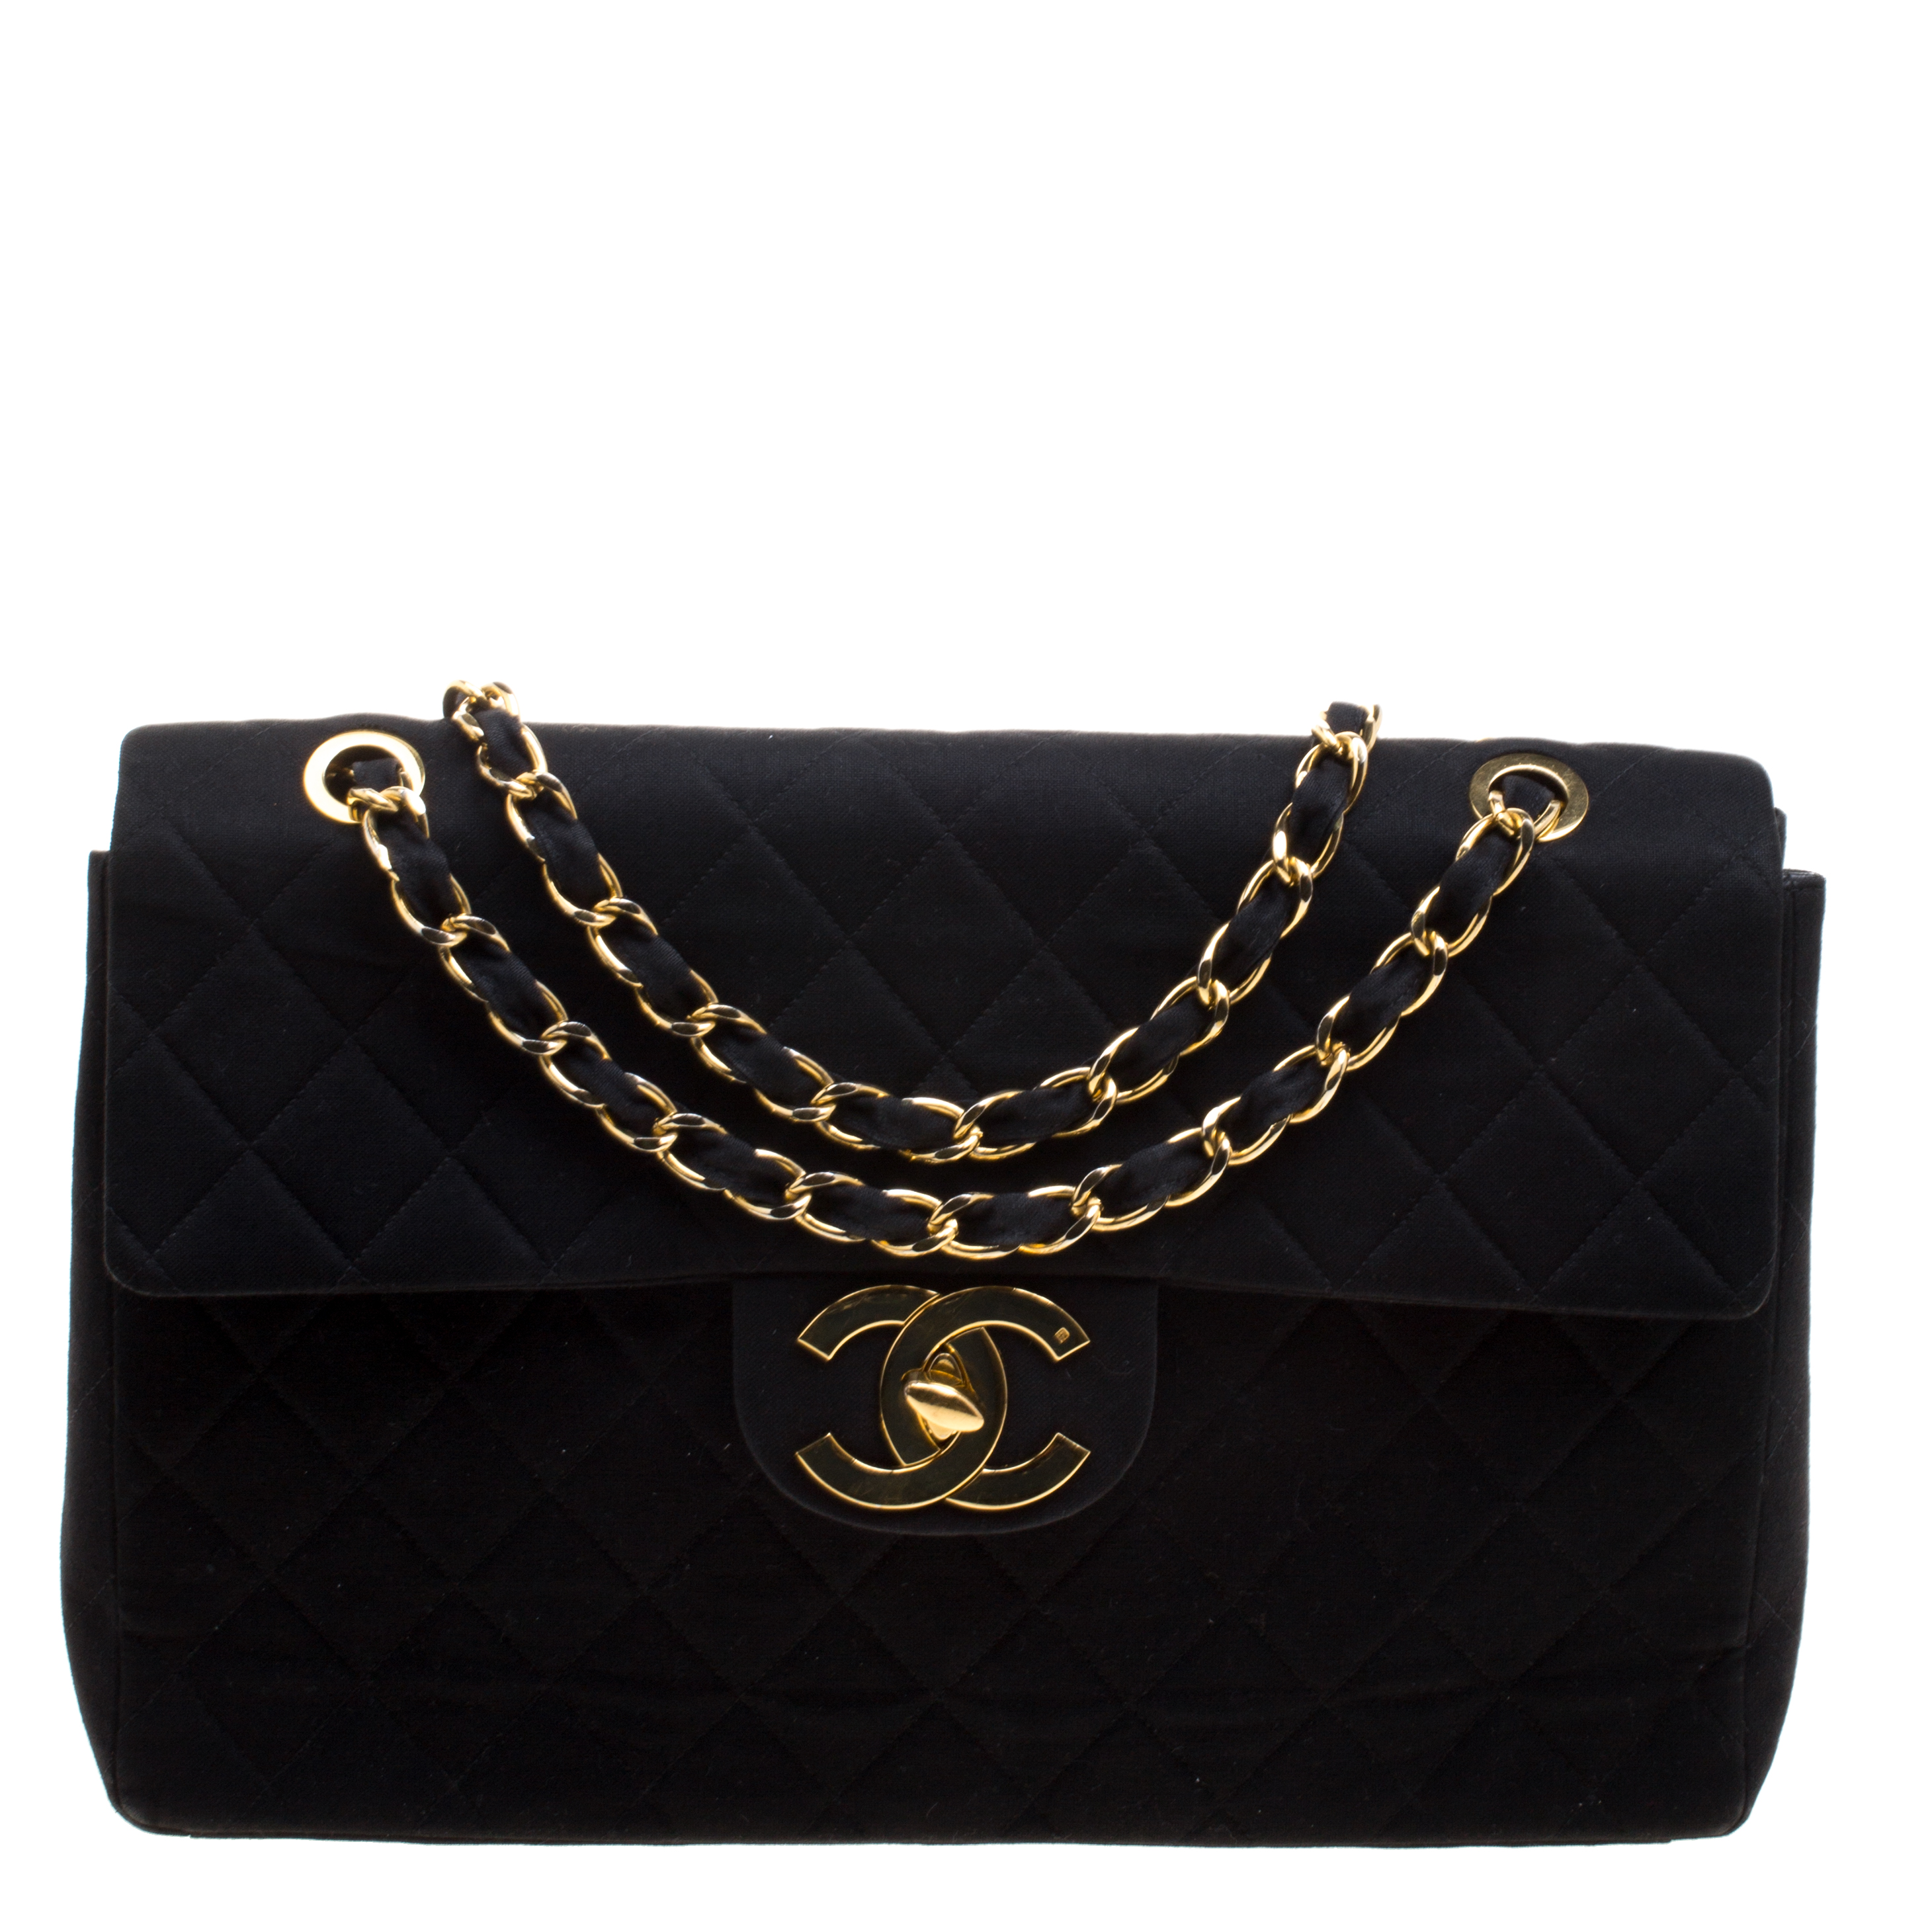 Chanel Black Quilted Canvas Maxi Vintage Classic Single Flap Bag